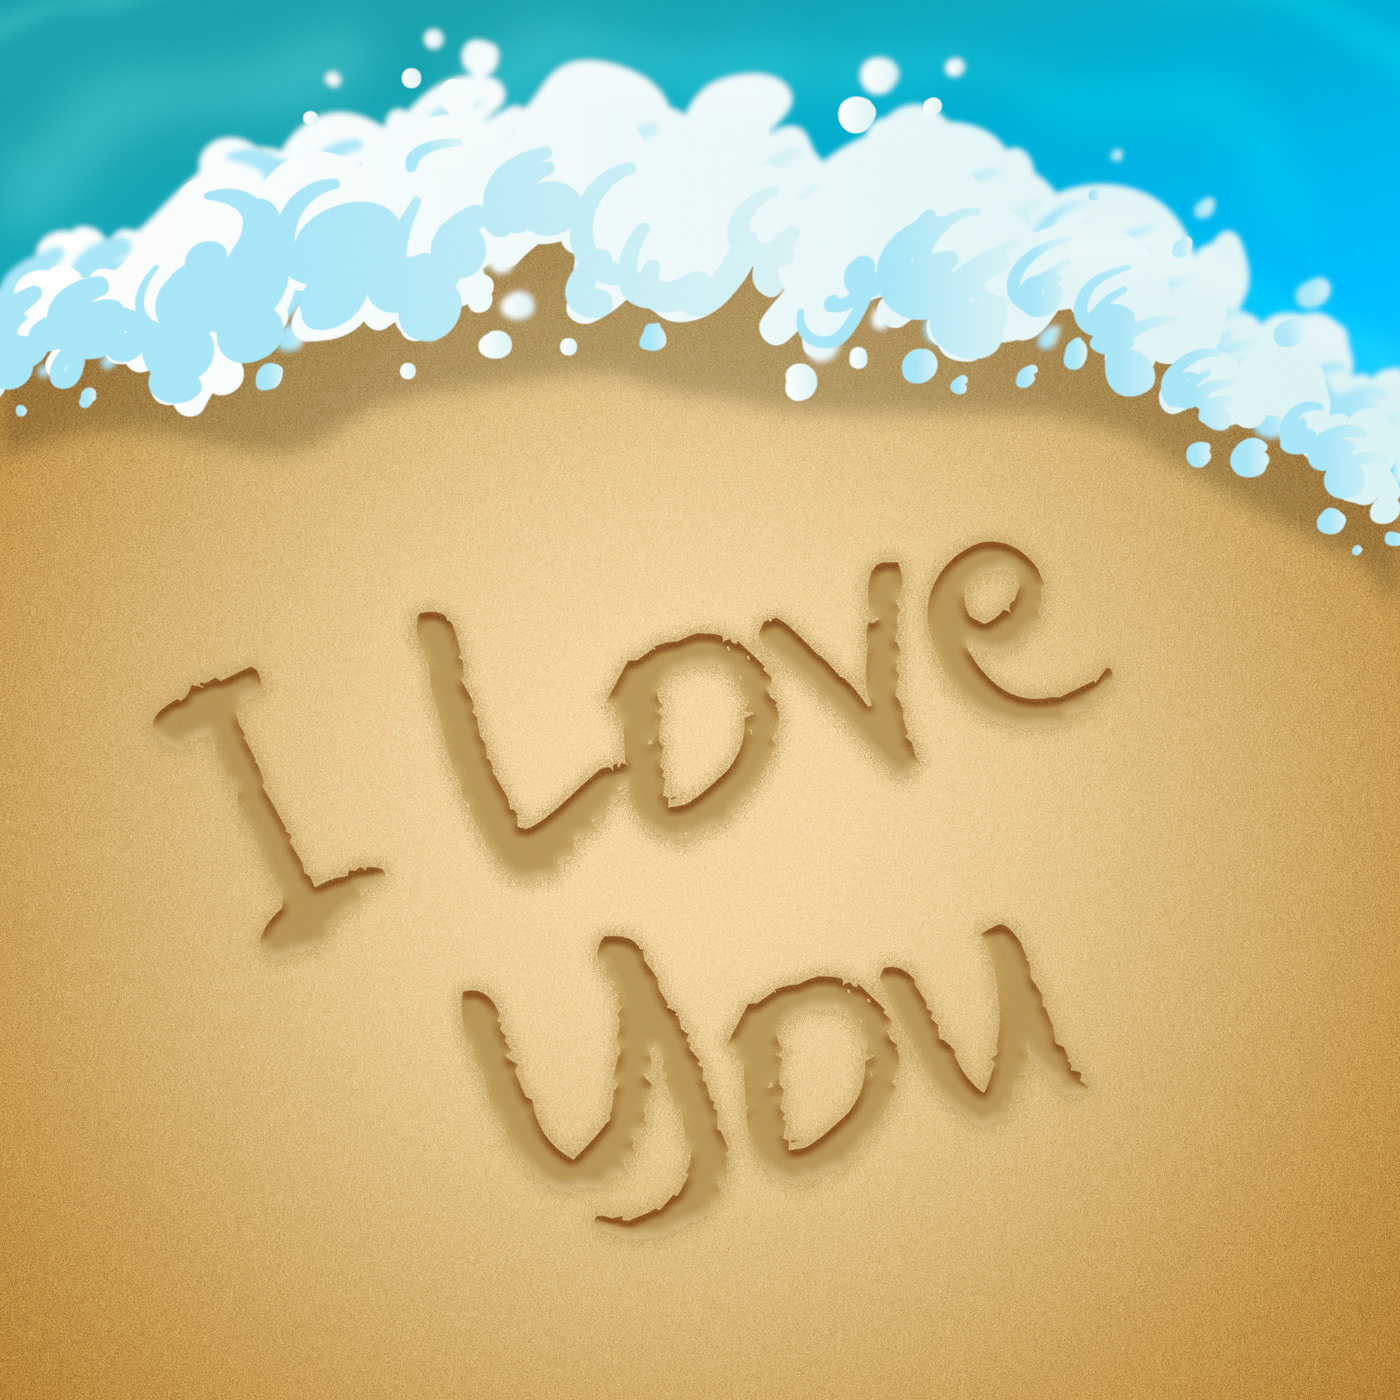 Love you means loving passion 3d illustration photo